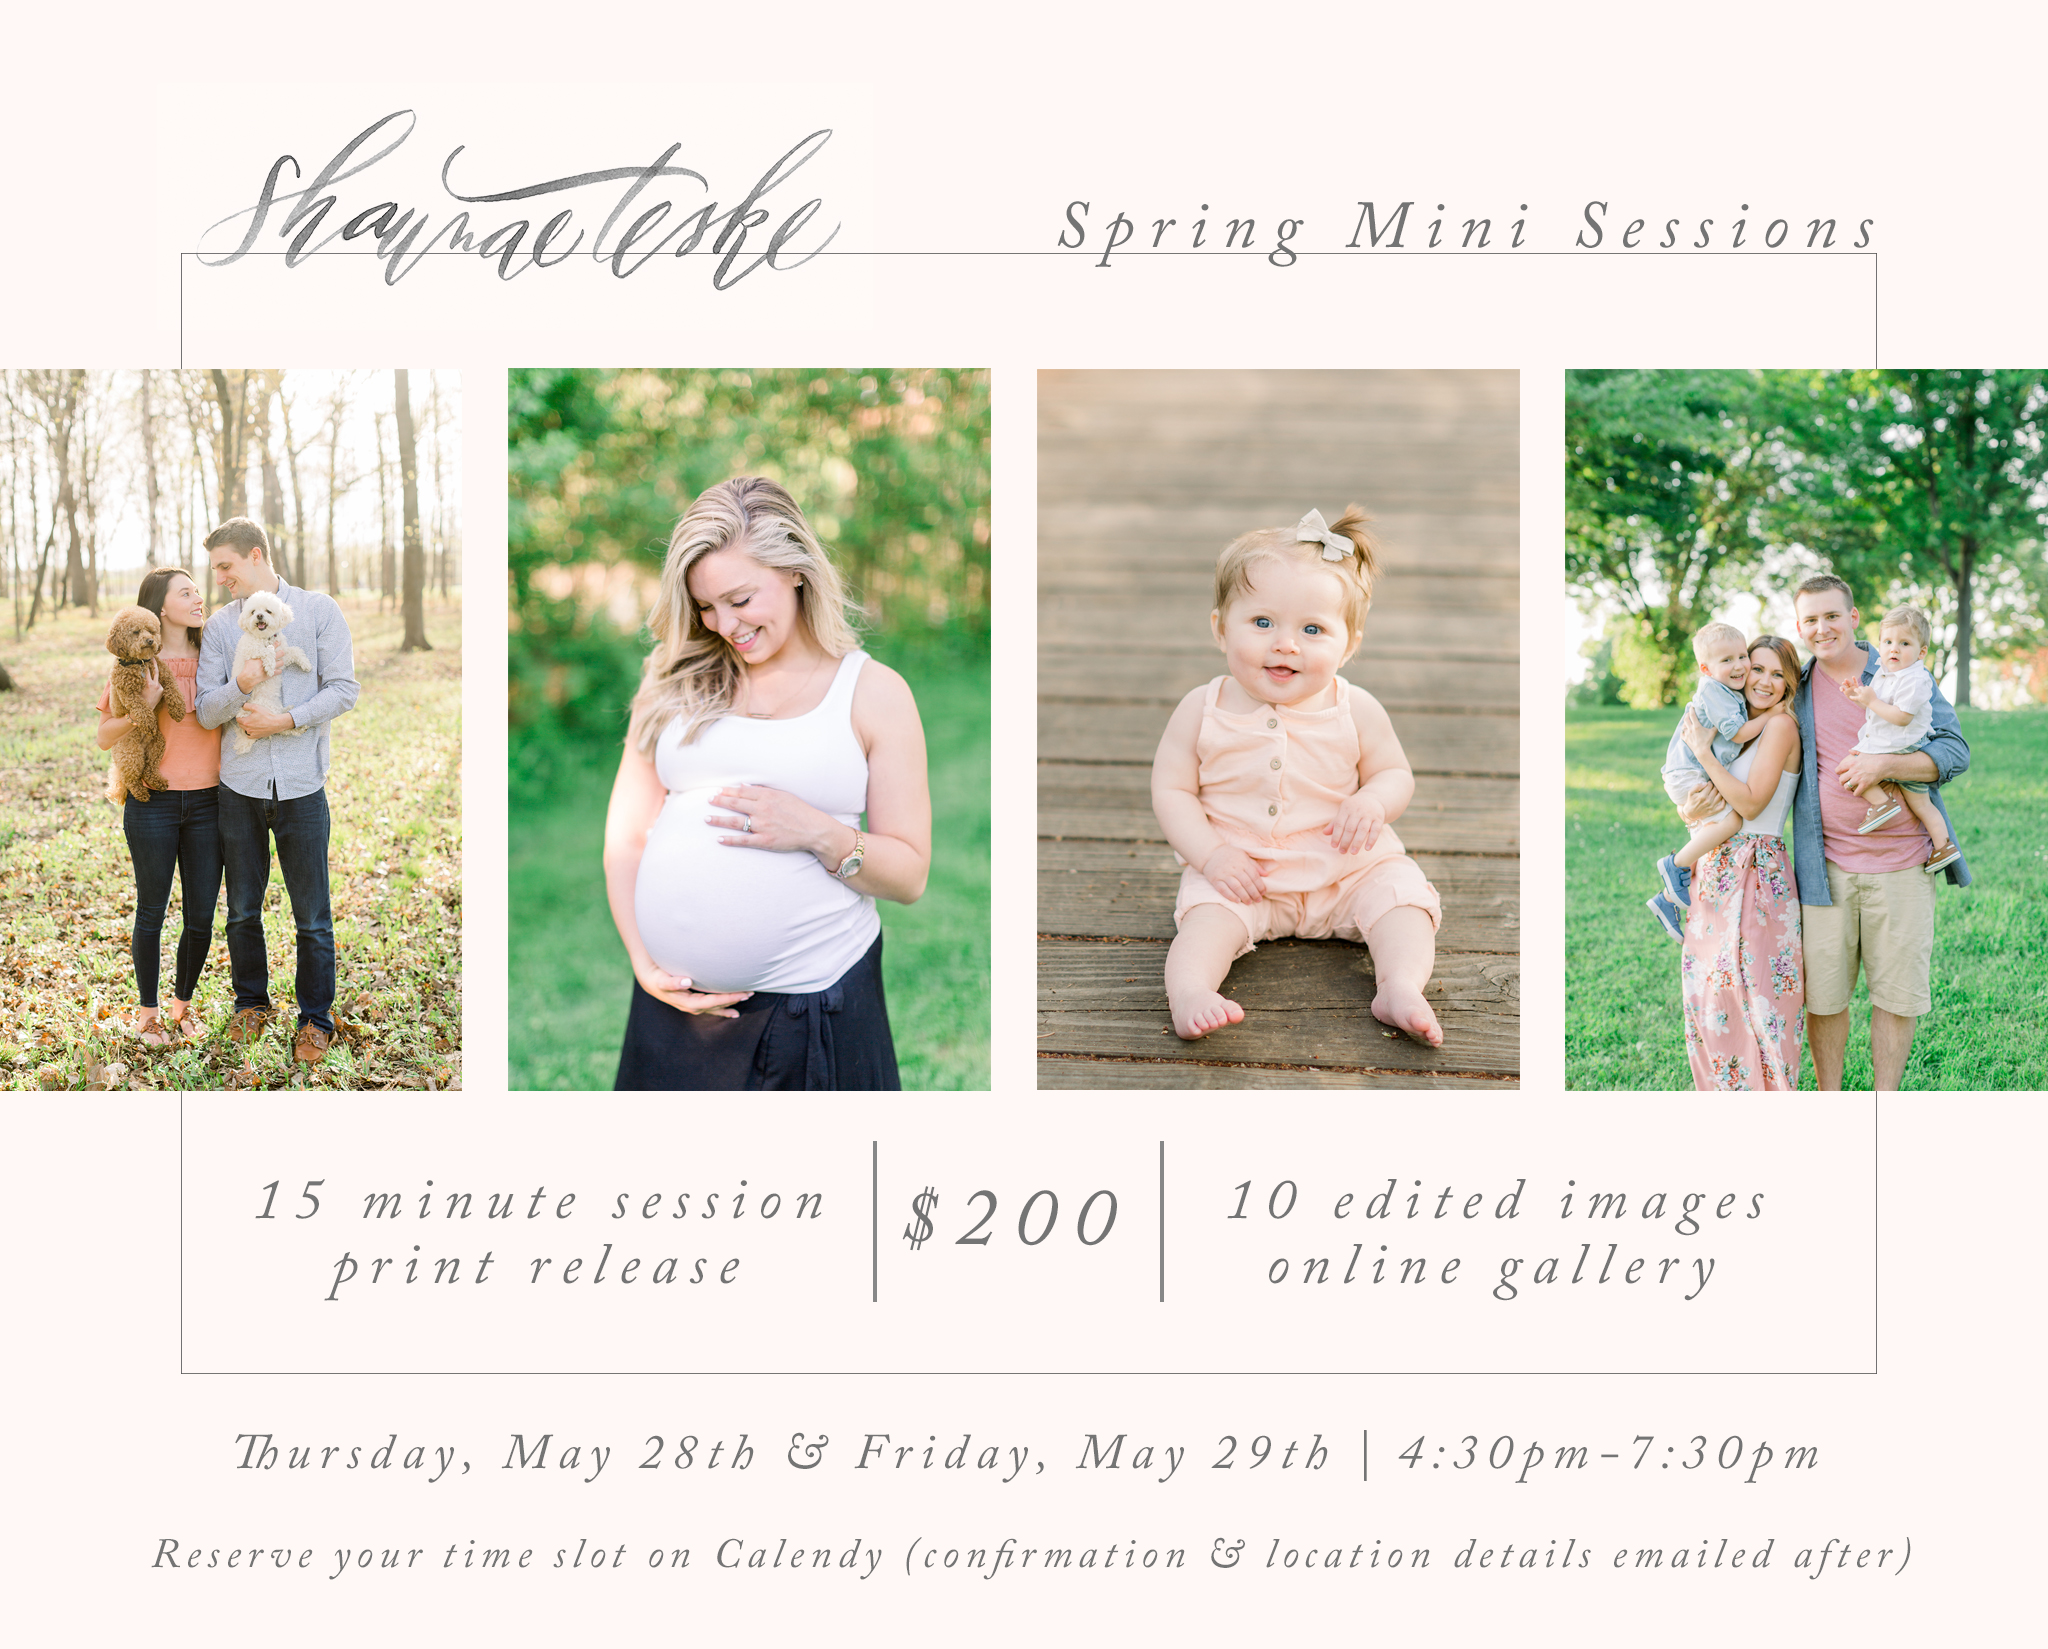 Outdoor family photos during spring mini sessions by Green Bay Photographer, Shaunae Teske.